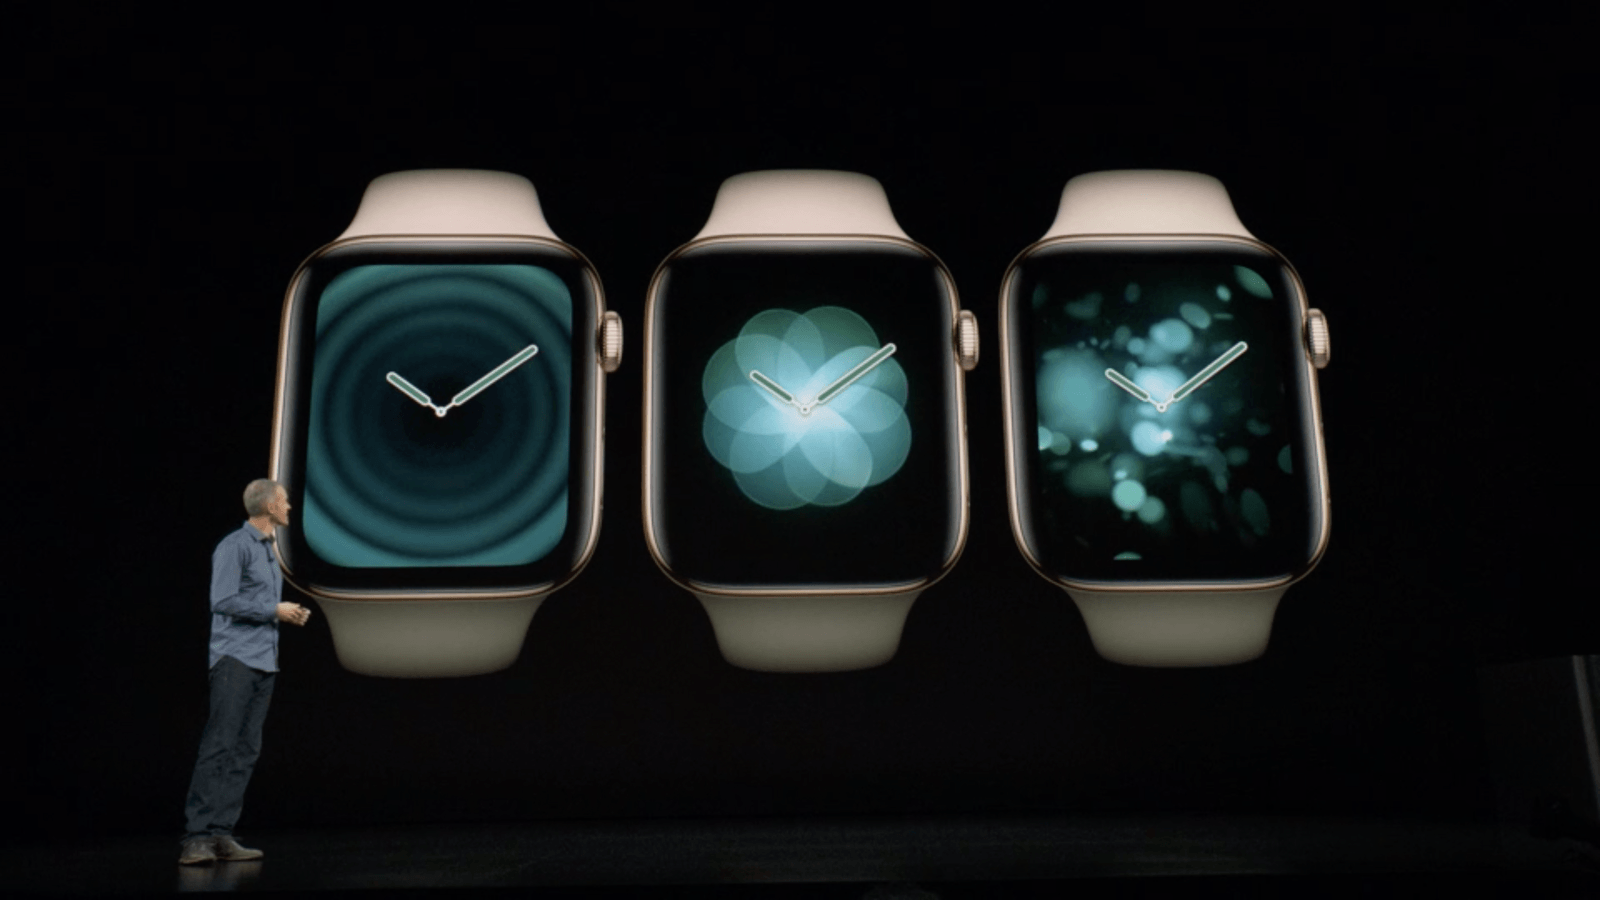 Here are four new watch faces coming to existing Apple Watches